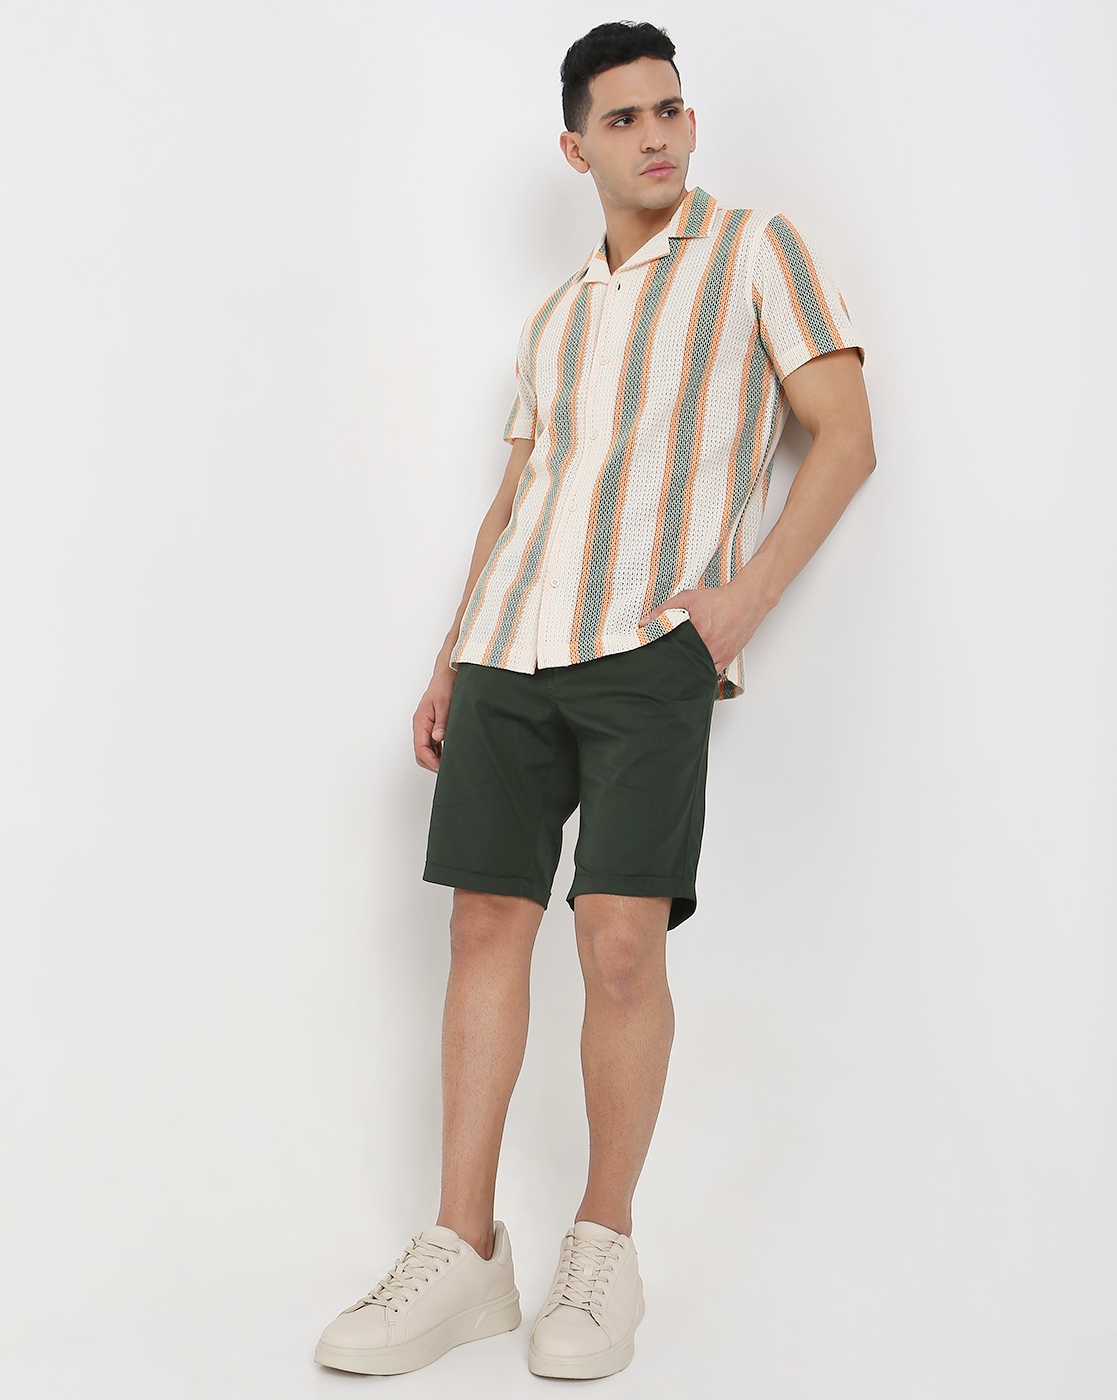 Regular Fit Striped Short Sleeve Shirt with Classic Collar